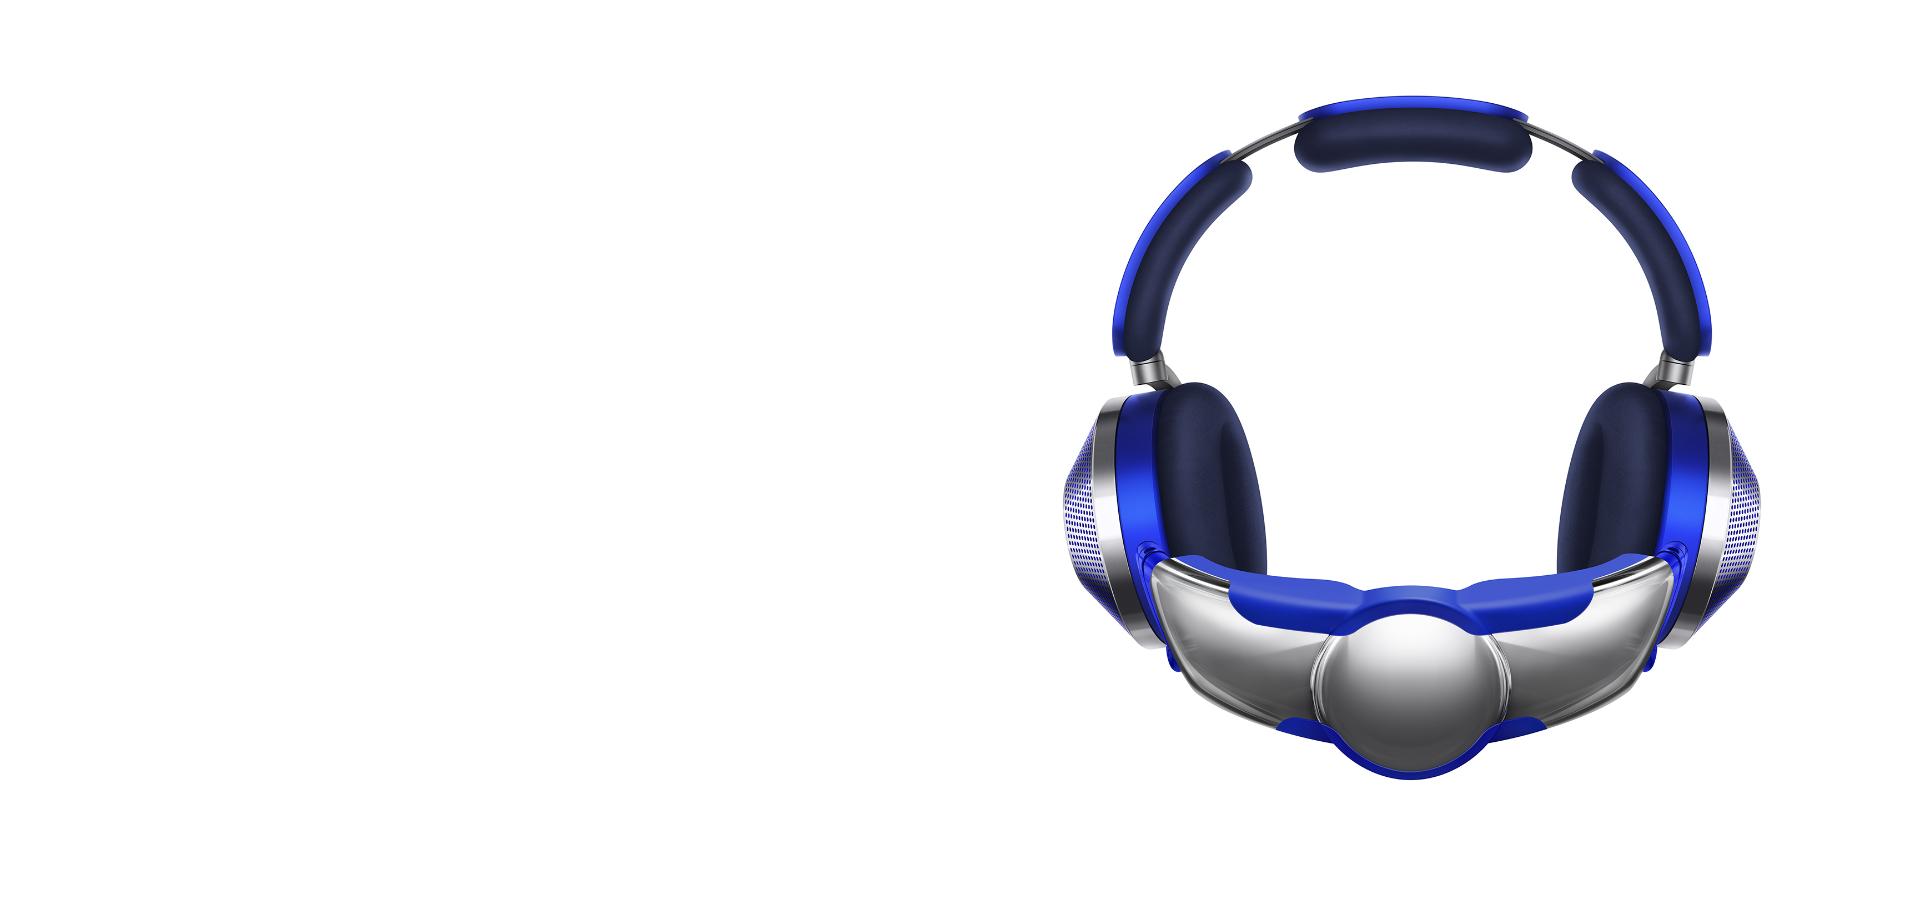 Dyson Zone™ air purifying headphones